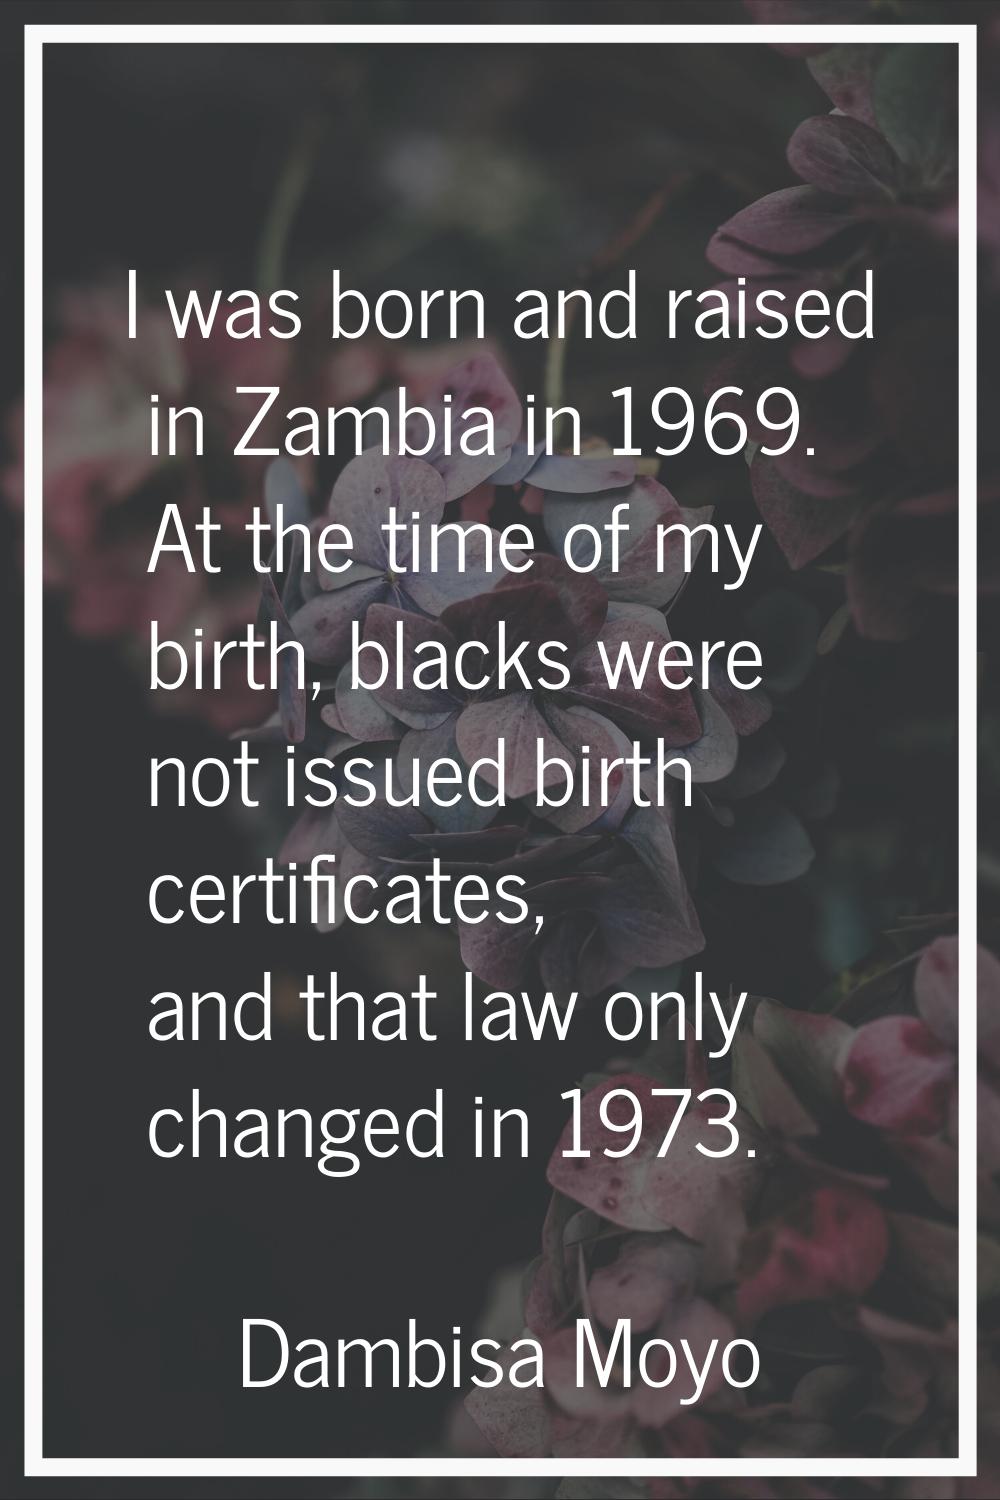 I was born and raised in Zambia in 1969. At the time of my birth, blacks were not issued birth cert